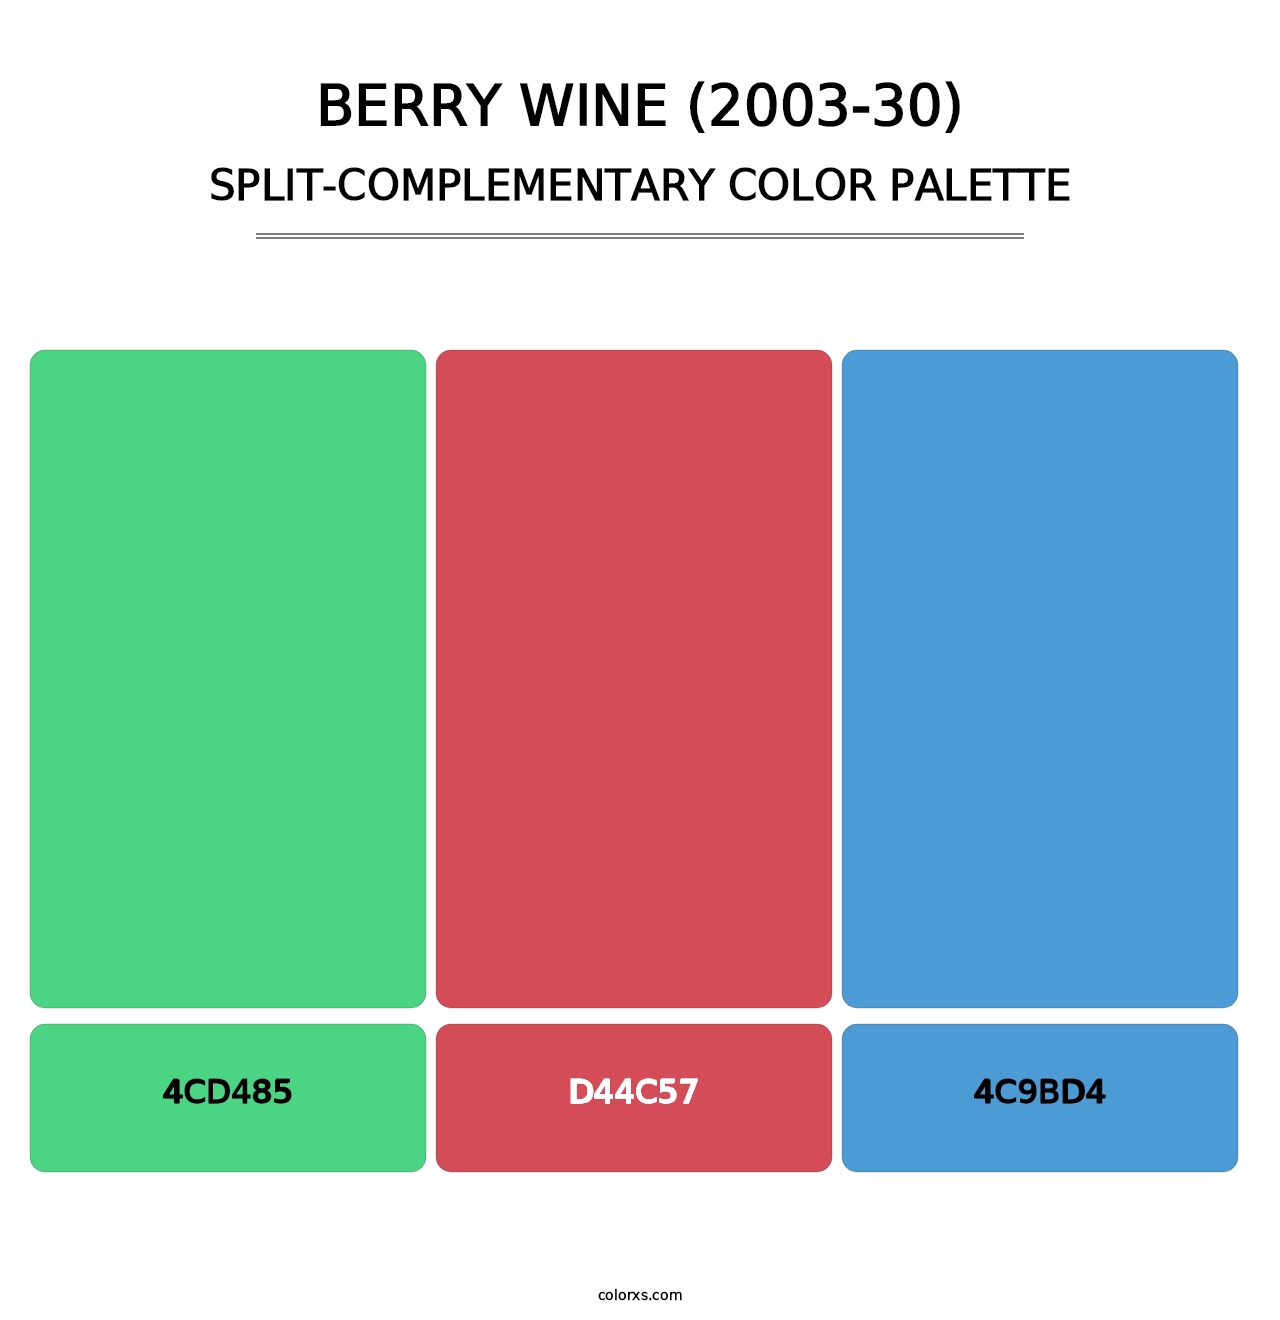 Berry Wine (2003-30) - Split-Complementary Color Palette